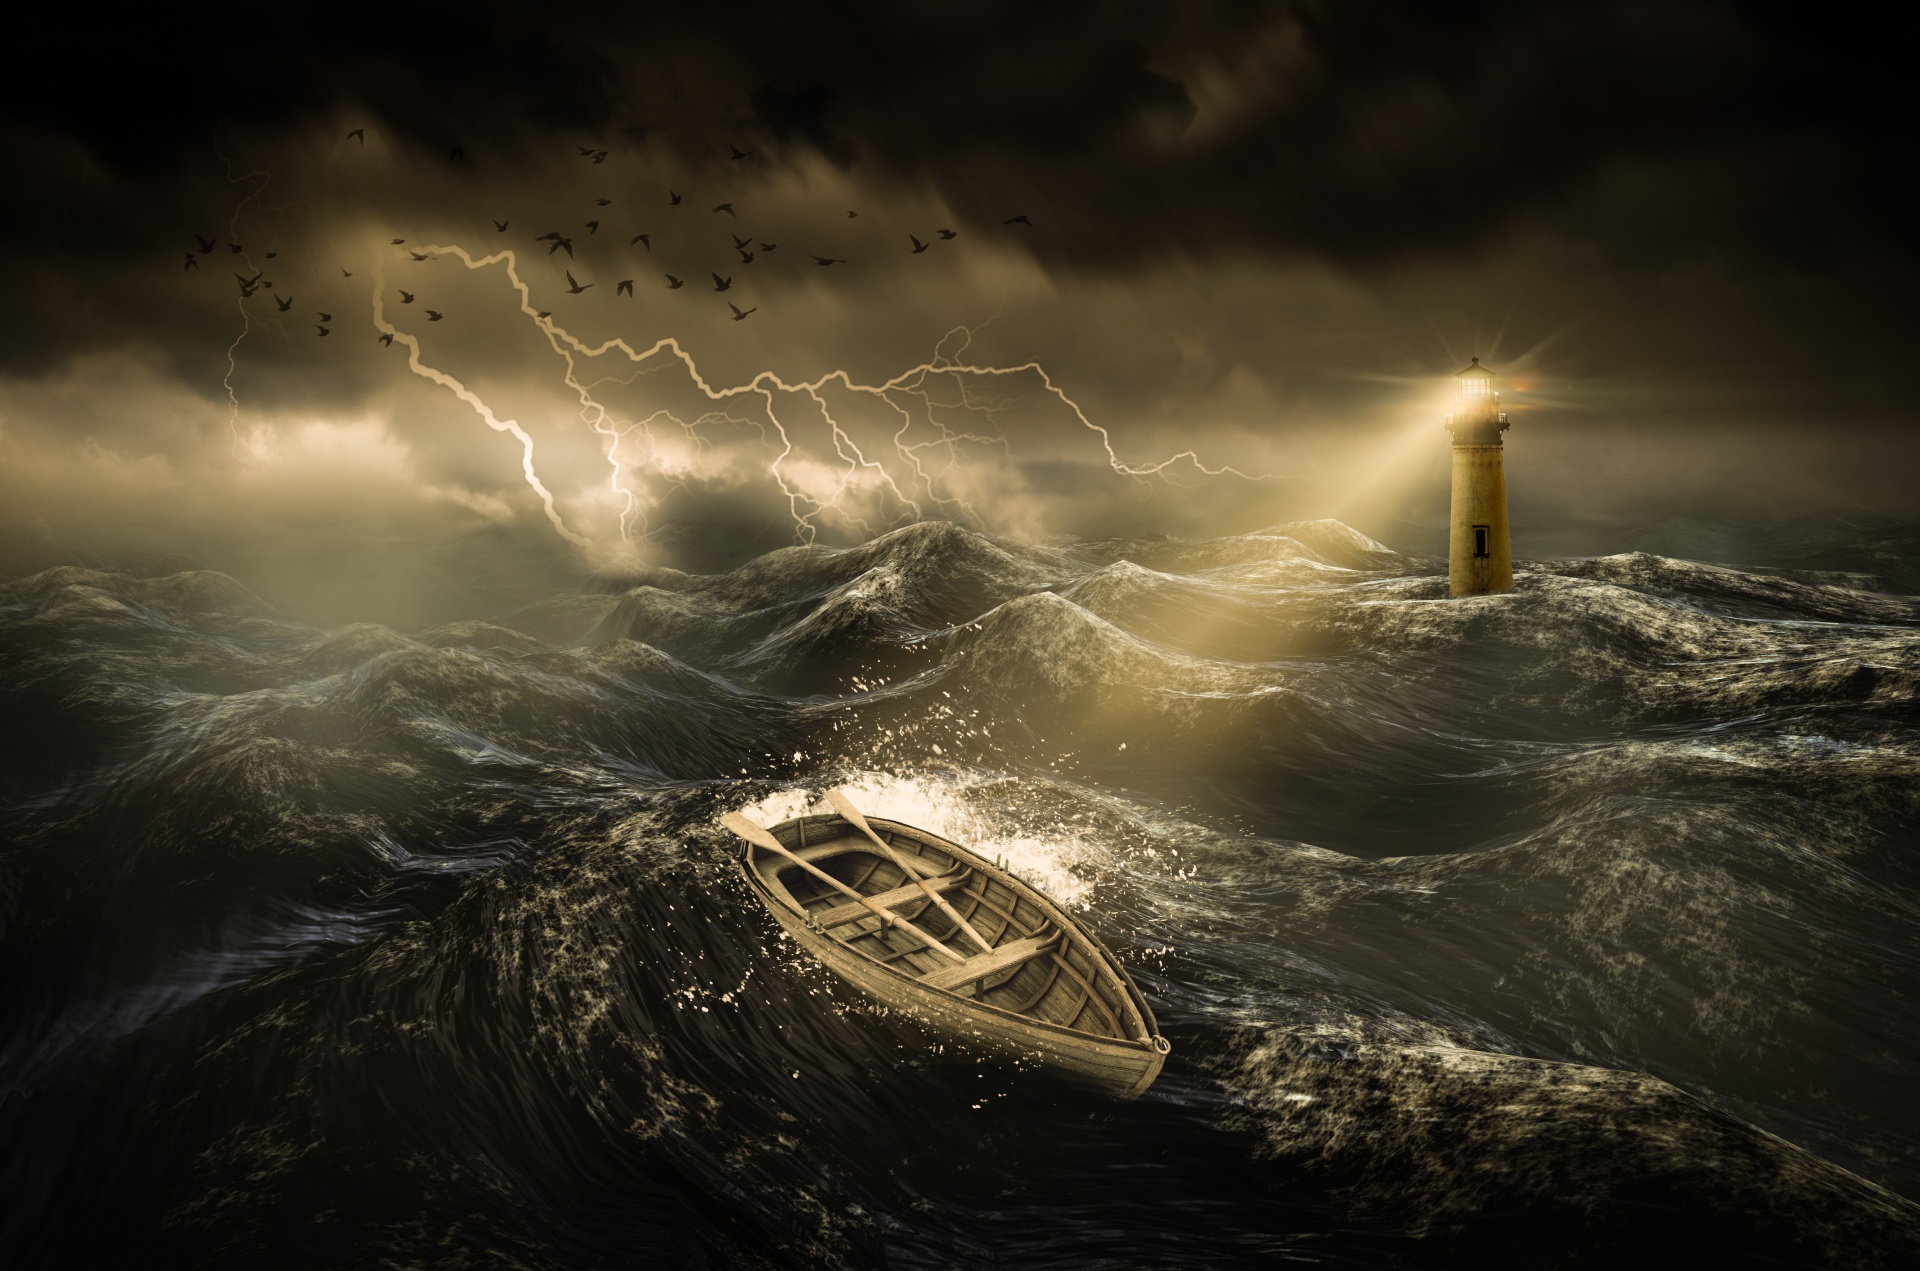 Wooden Boat In A Stormy Sea